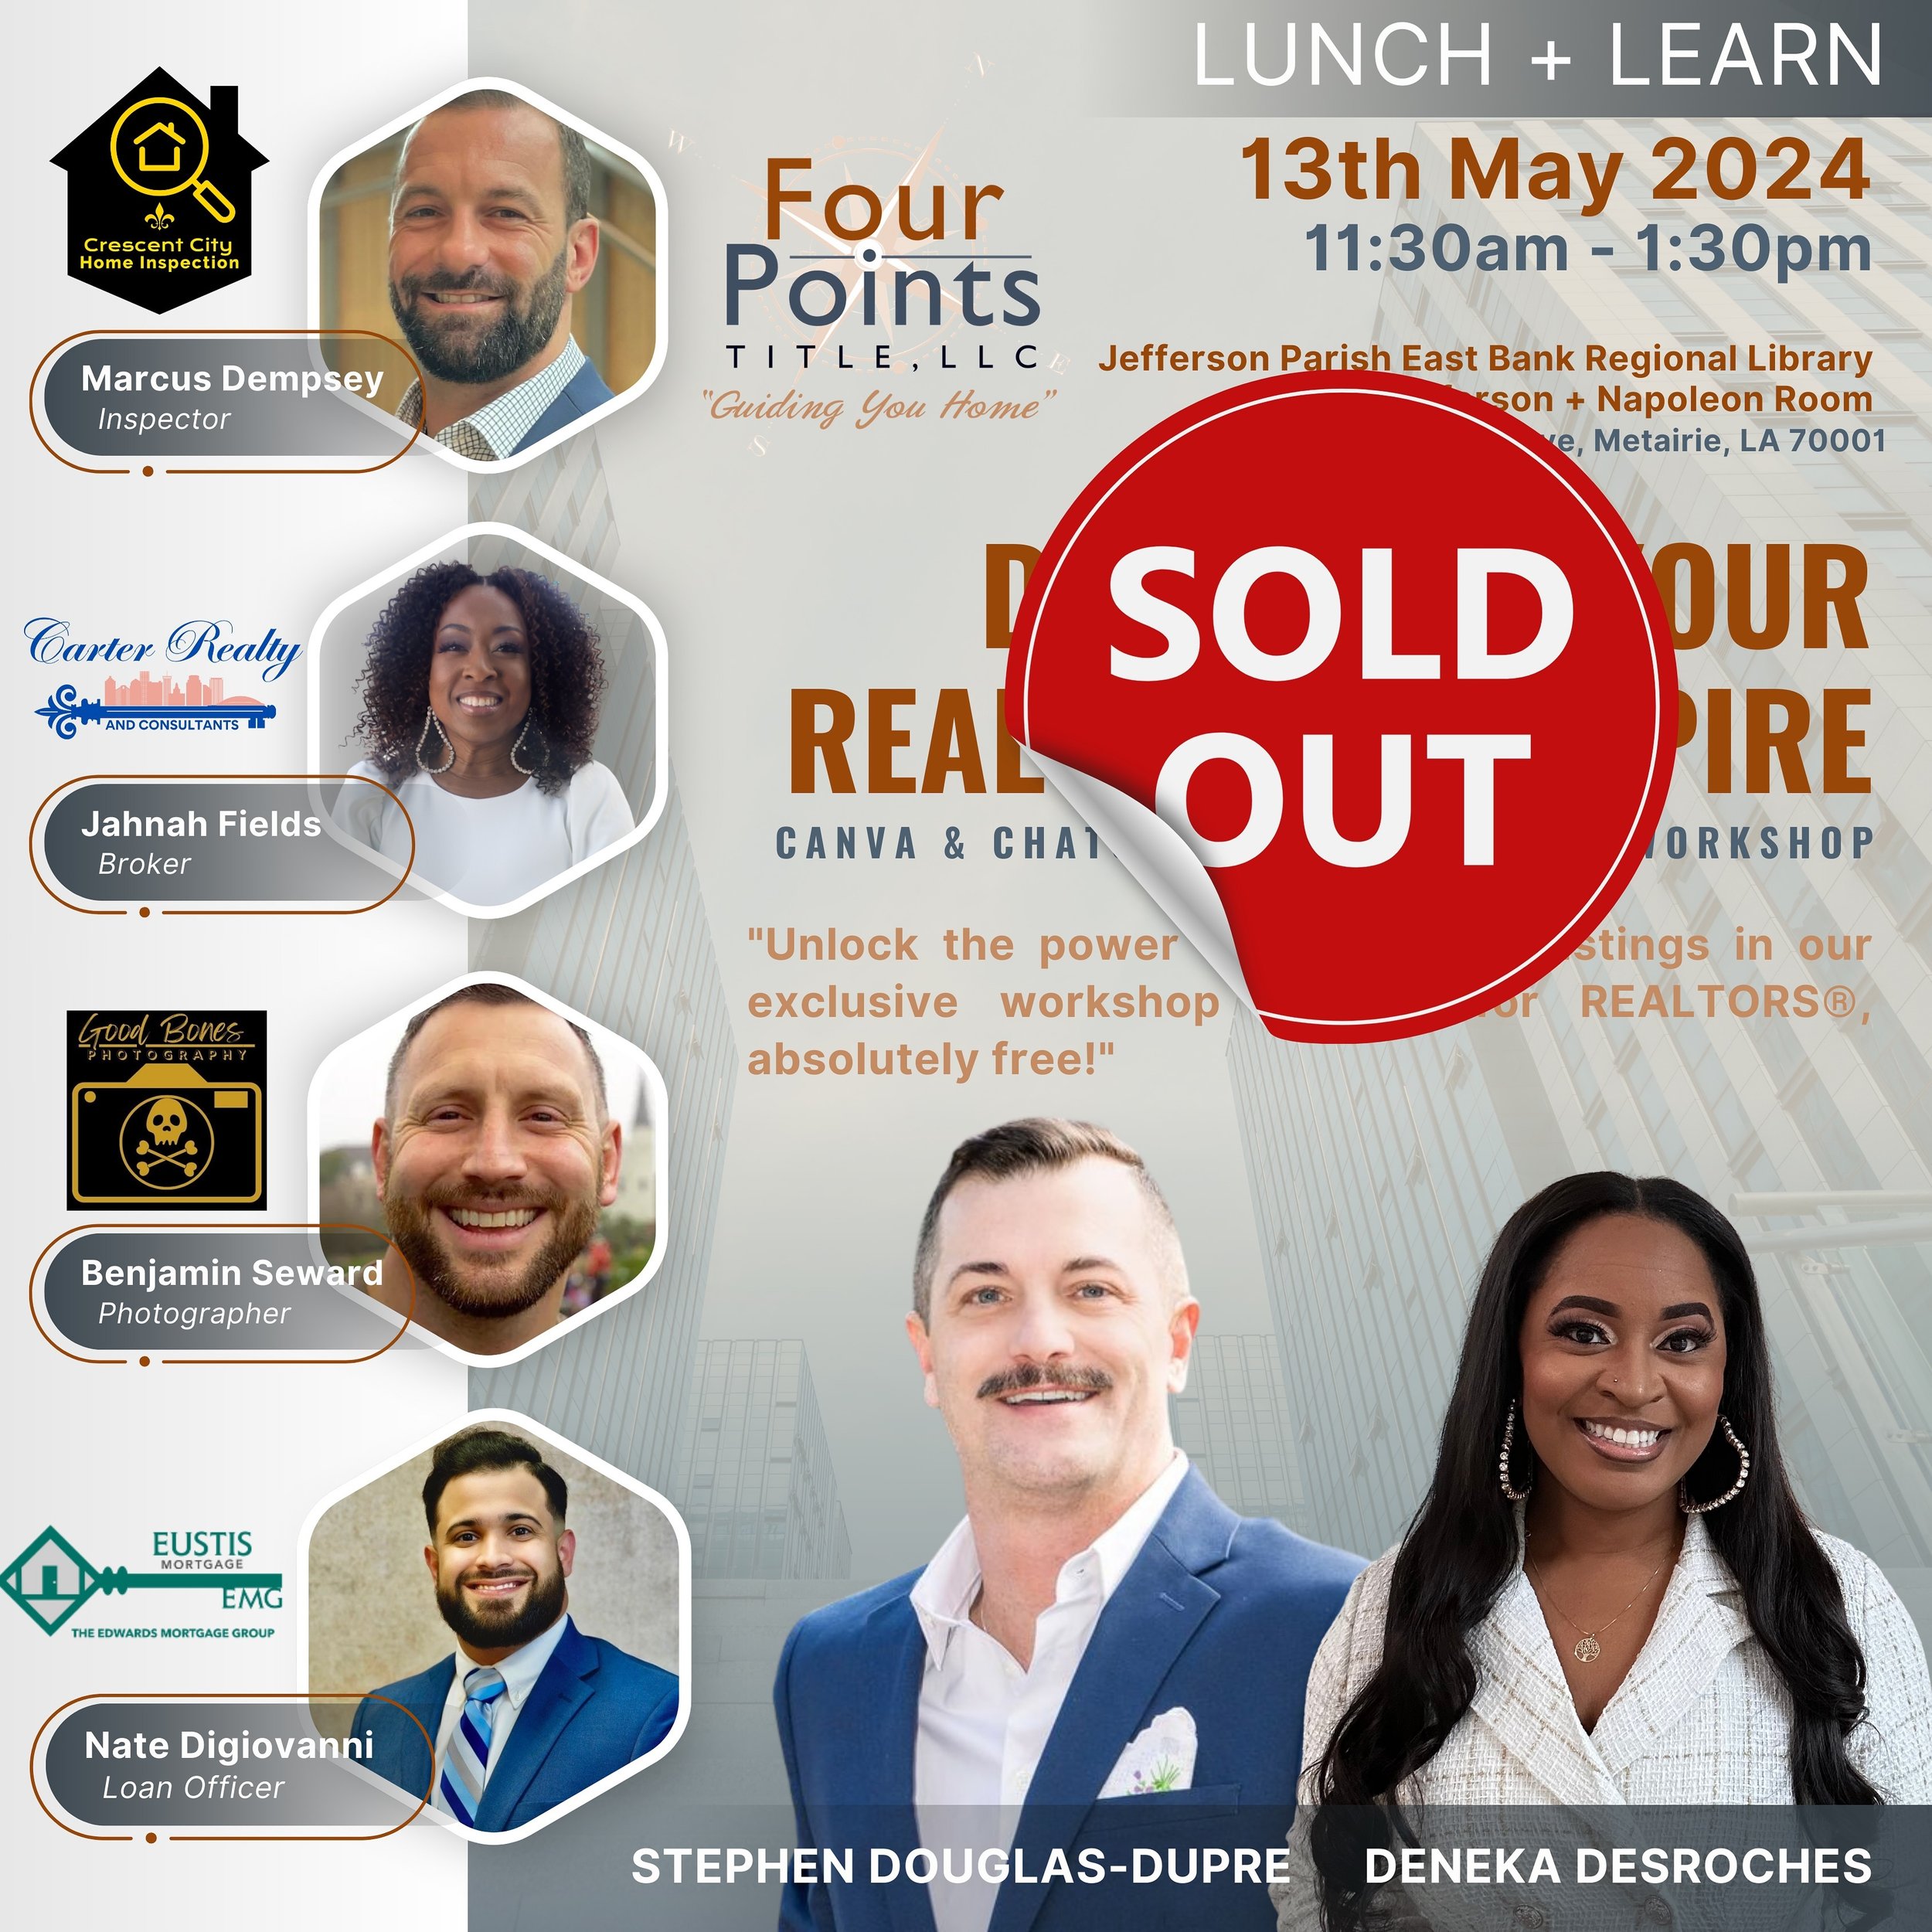 We&rsquo;ve SOLD OUT! REALTORS&reg; get READY TO ELEVATE your real estate game with our Canva &amp; ChatGPT interactive Listing Website workshop today hosted by Stephen Douglas Dupre @fourpointstitlellc and friends. Lunch, door prizes, and FREE luxur